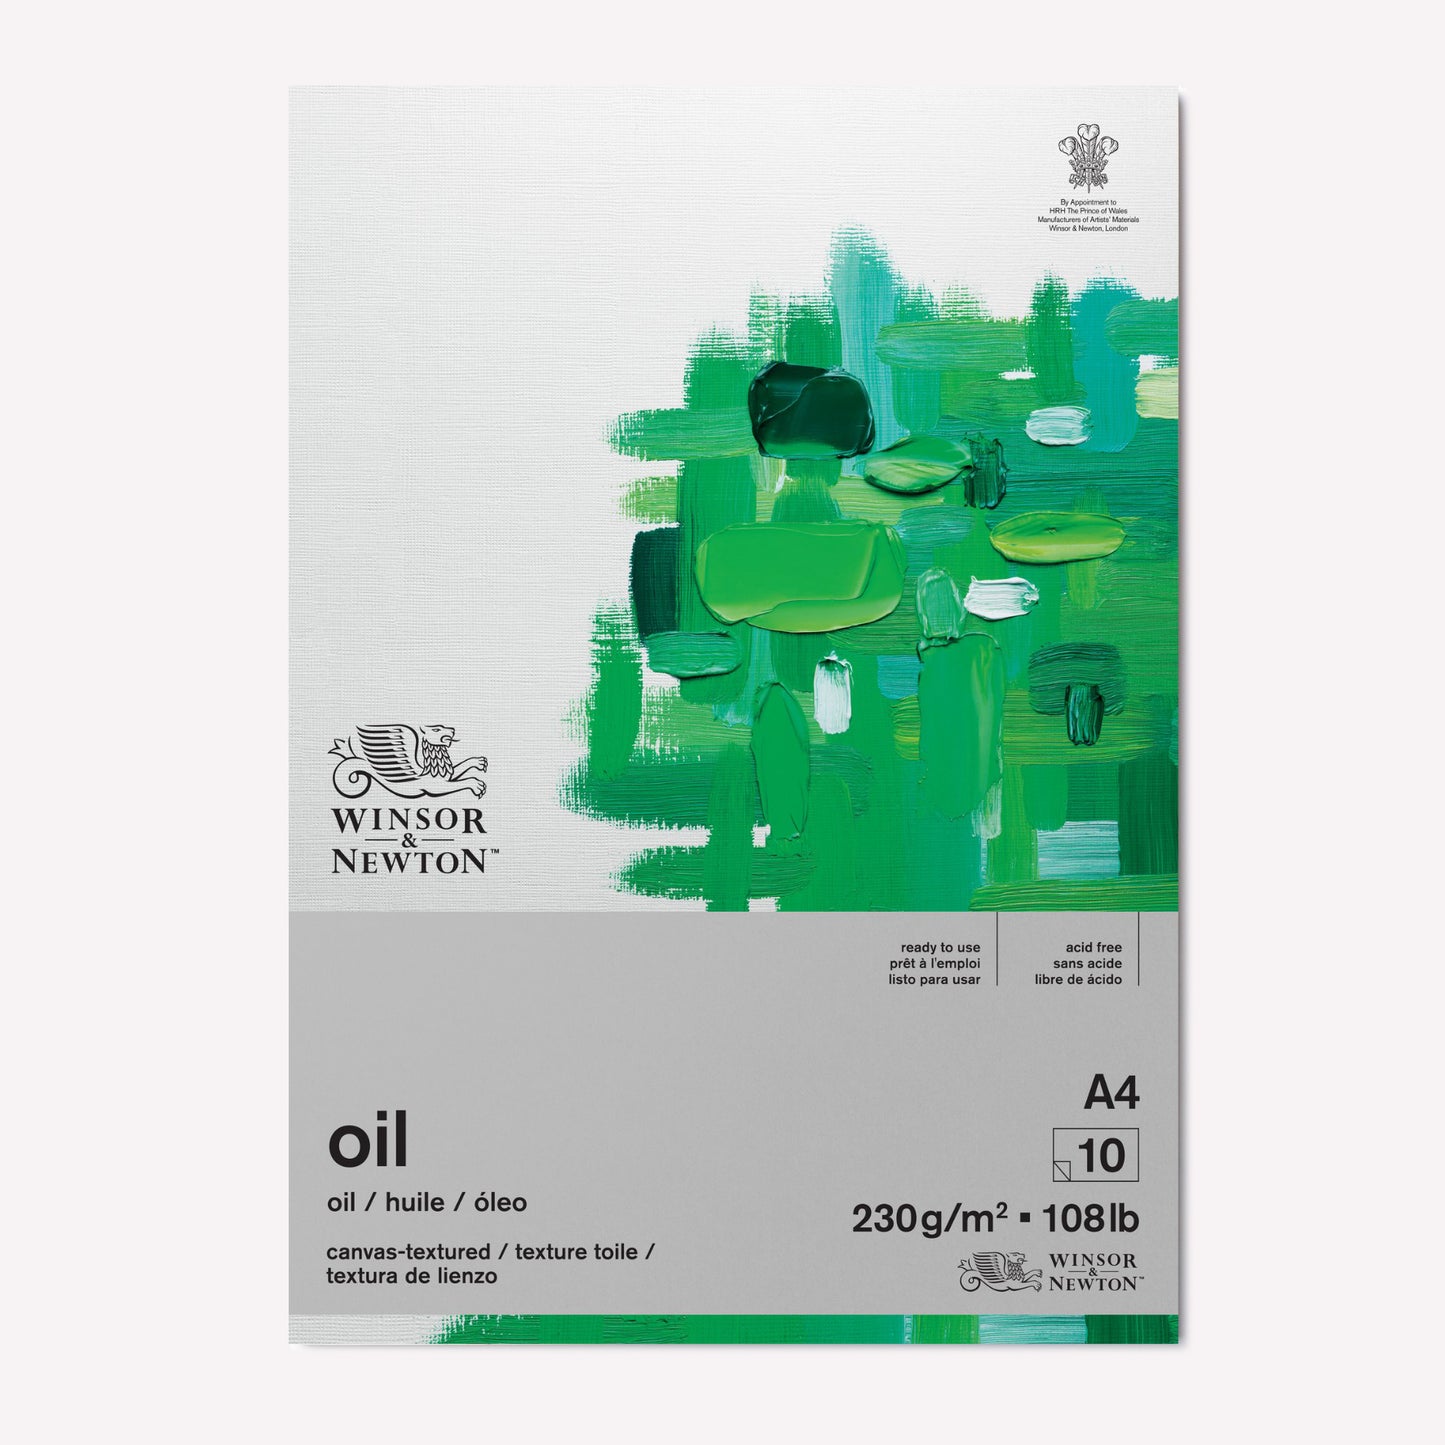 Winsor & Newton Artist A4 Oil Paper Pad. Cover features green feathered brushstrokes marks on a white background.  